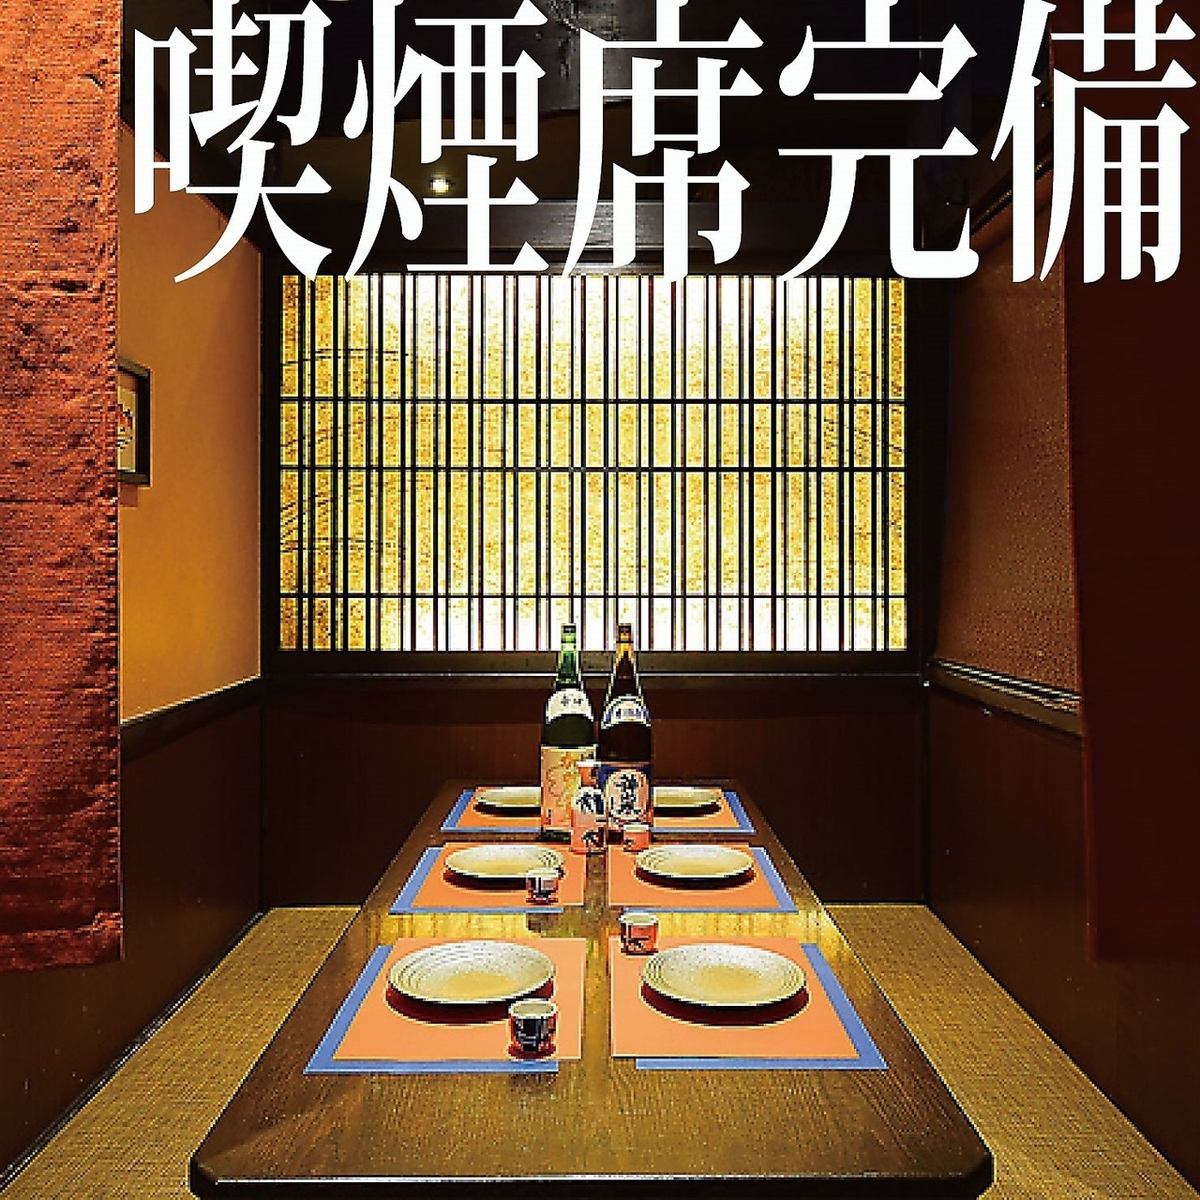 An izakaya with private rooms about a minute's walk from Nishiarai Station! All-you-can-drink courses start at 3,000 yen, and can accommodate up to 70 people!